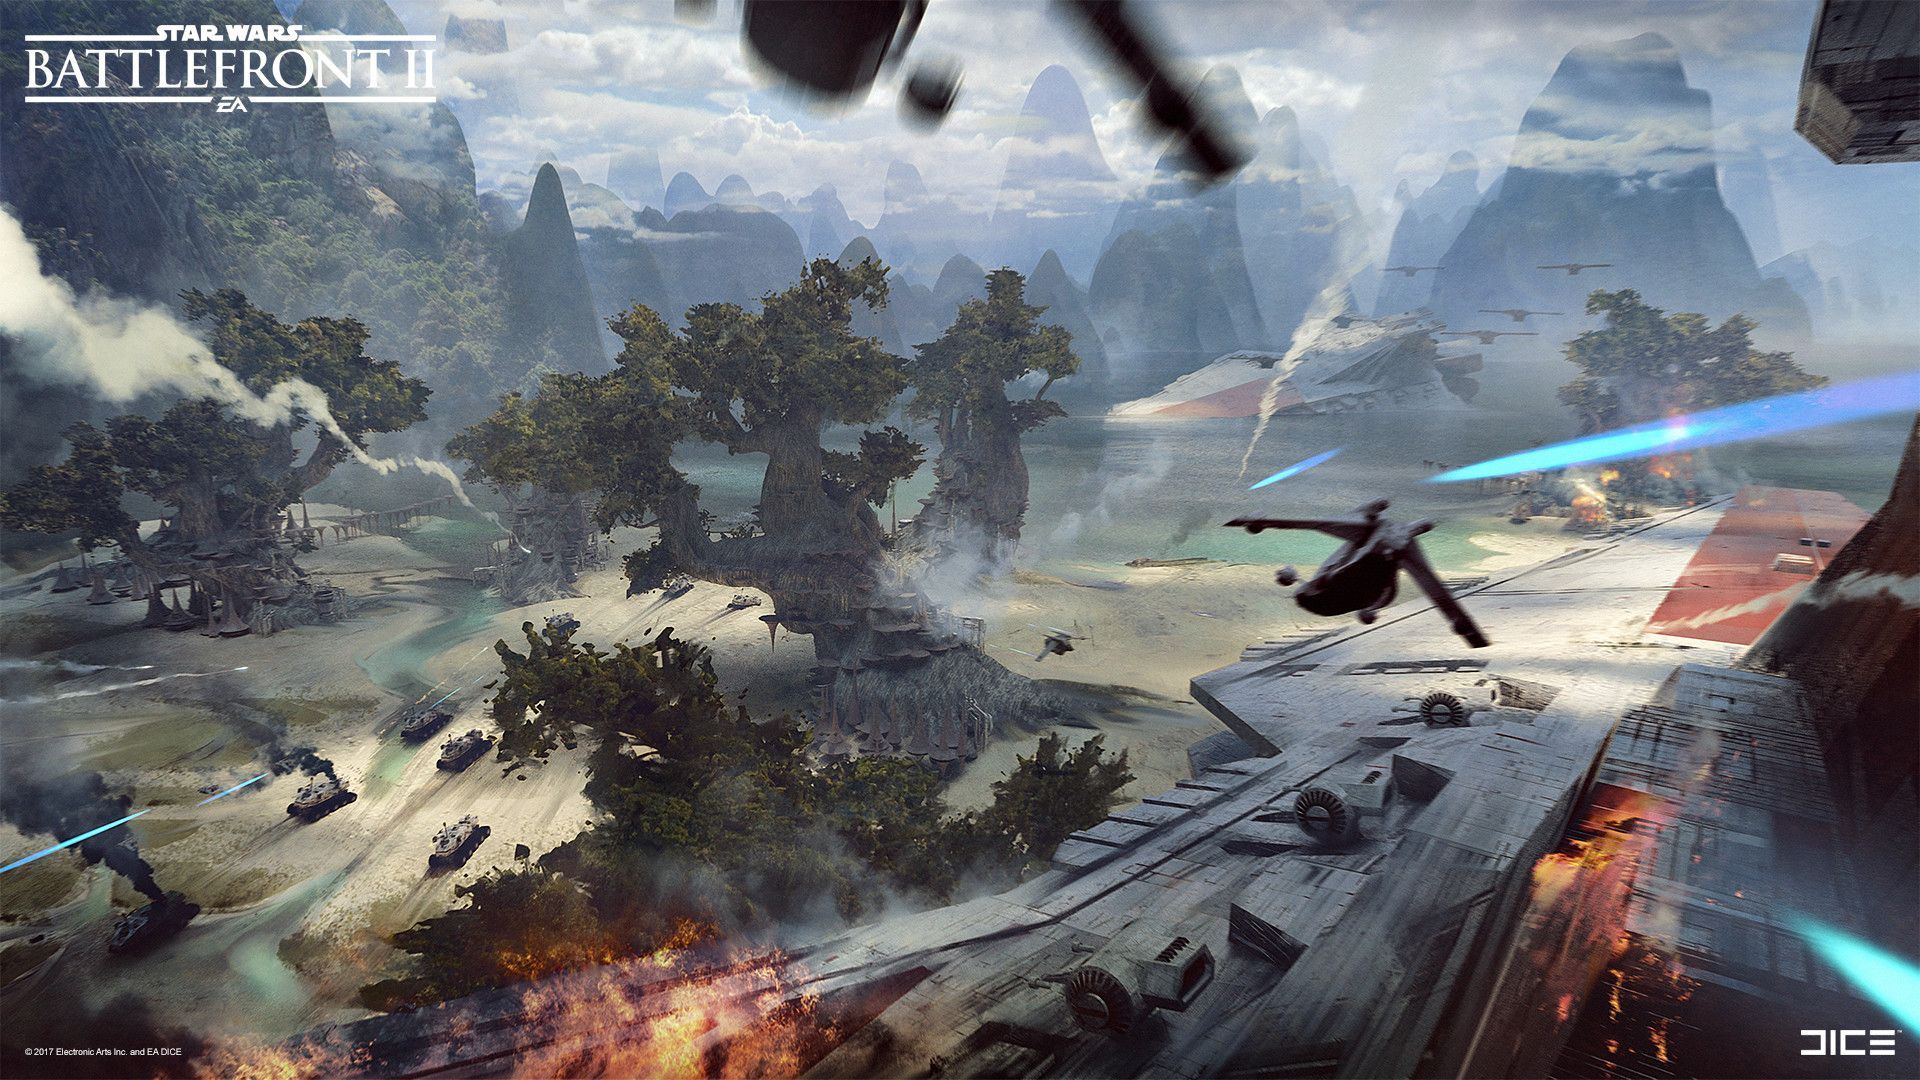 Some ideas of how the epicness of the Kashyyyk battles could feel. Star wars vehicles, Star wars image, Star wars picture